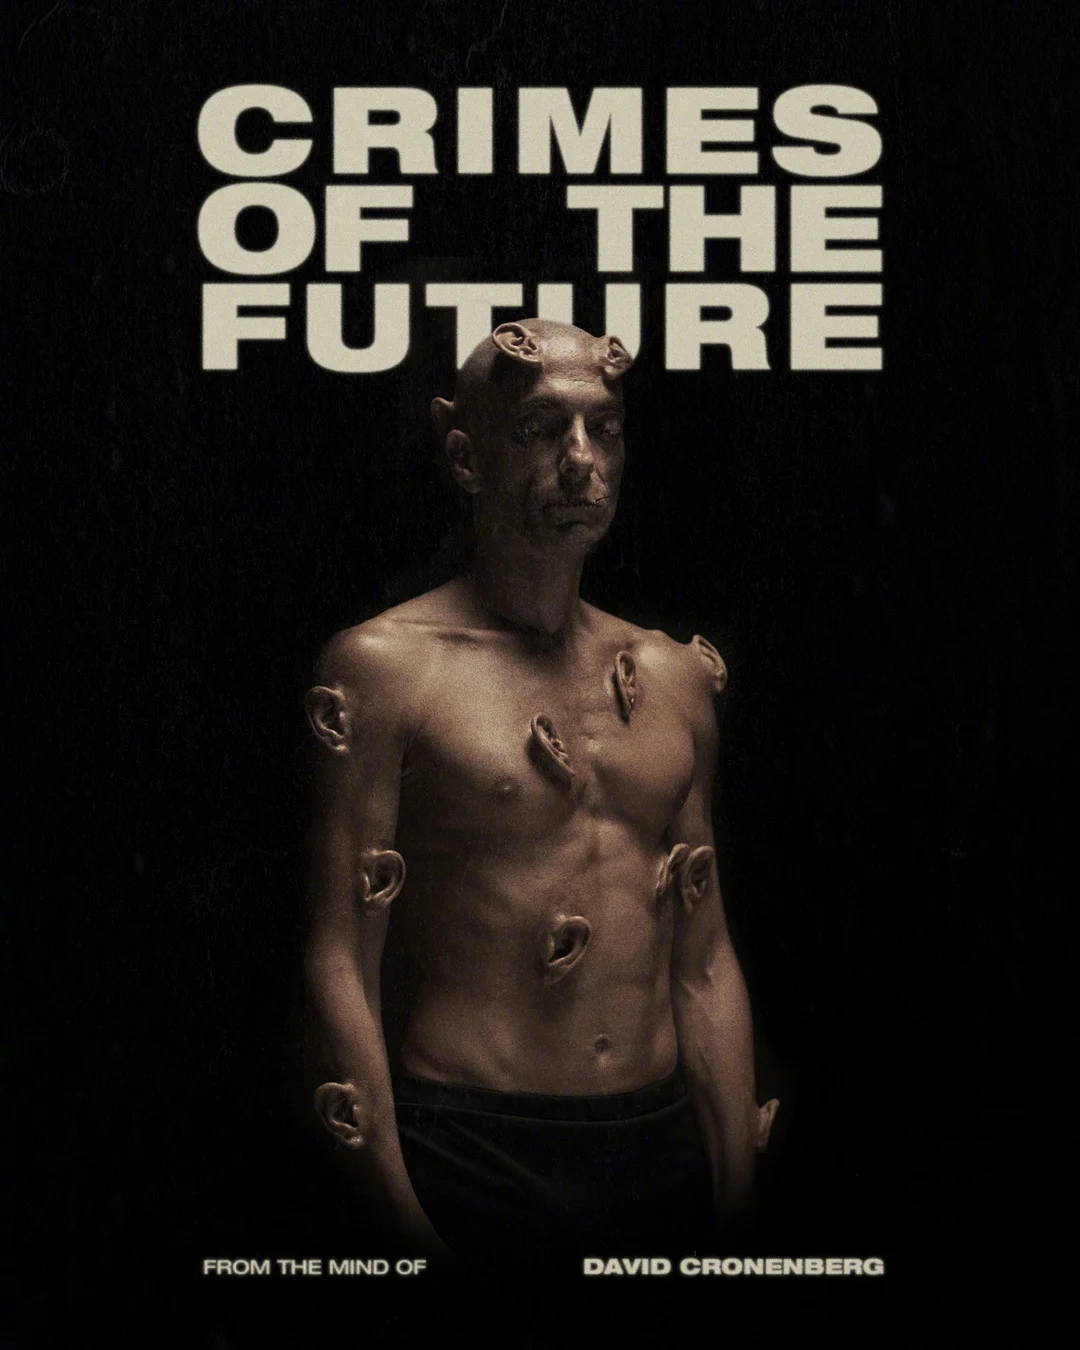 David Cronenberg's new film "Crimes of the Future‎" releases character posters